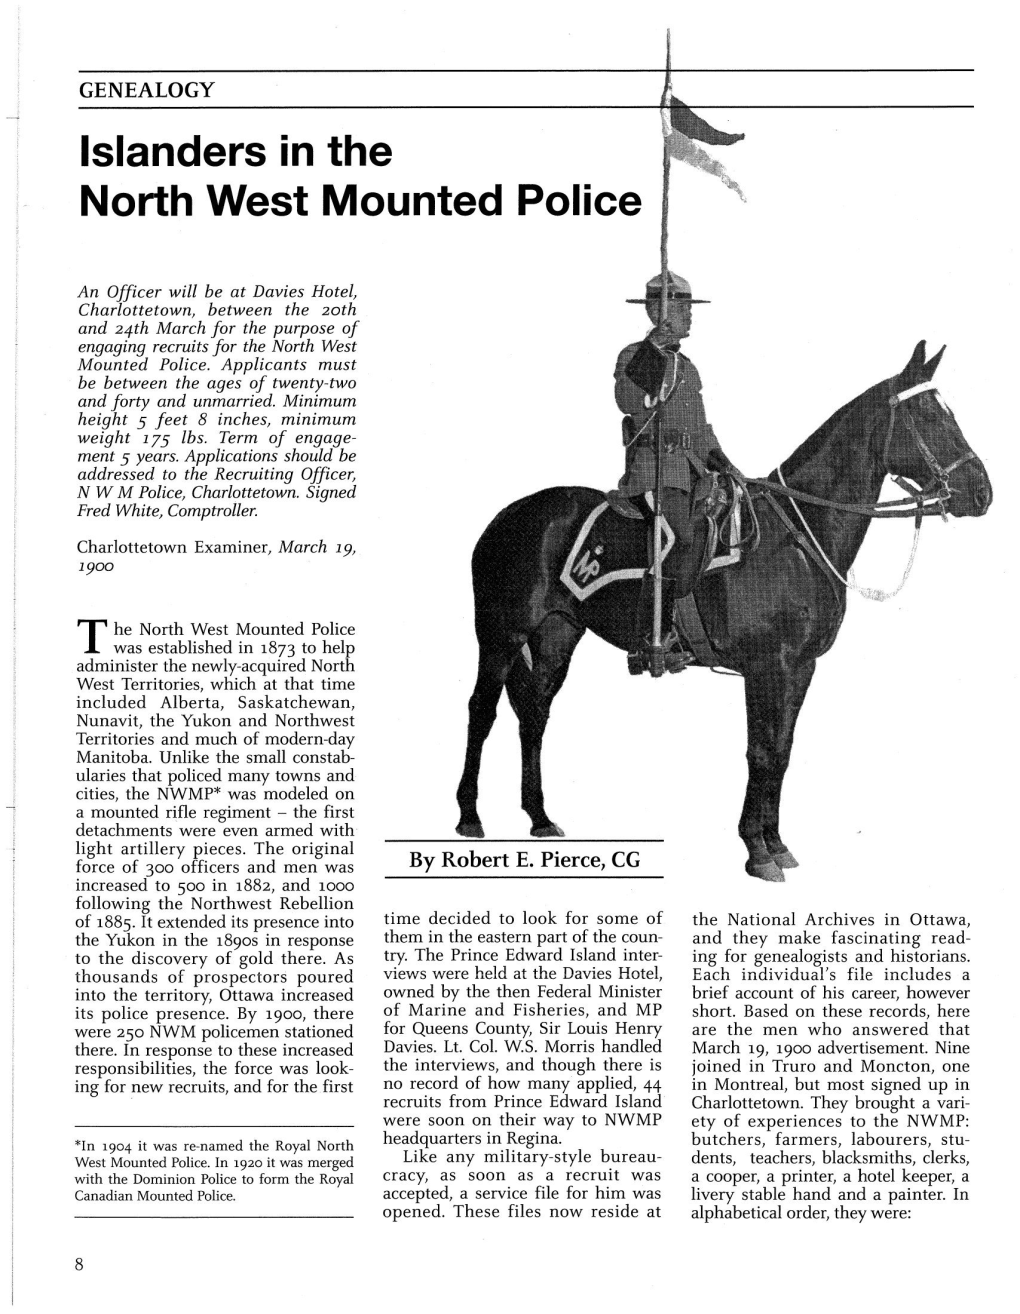 Islanders in the North West Mounted Police